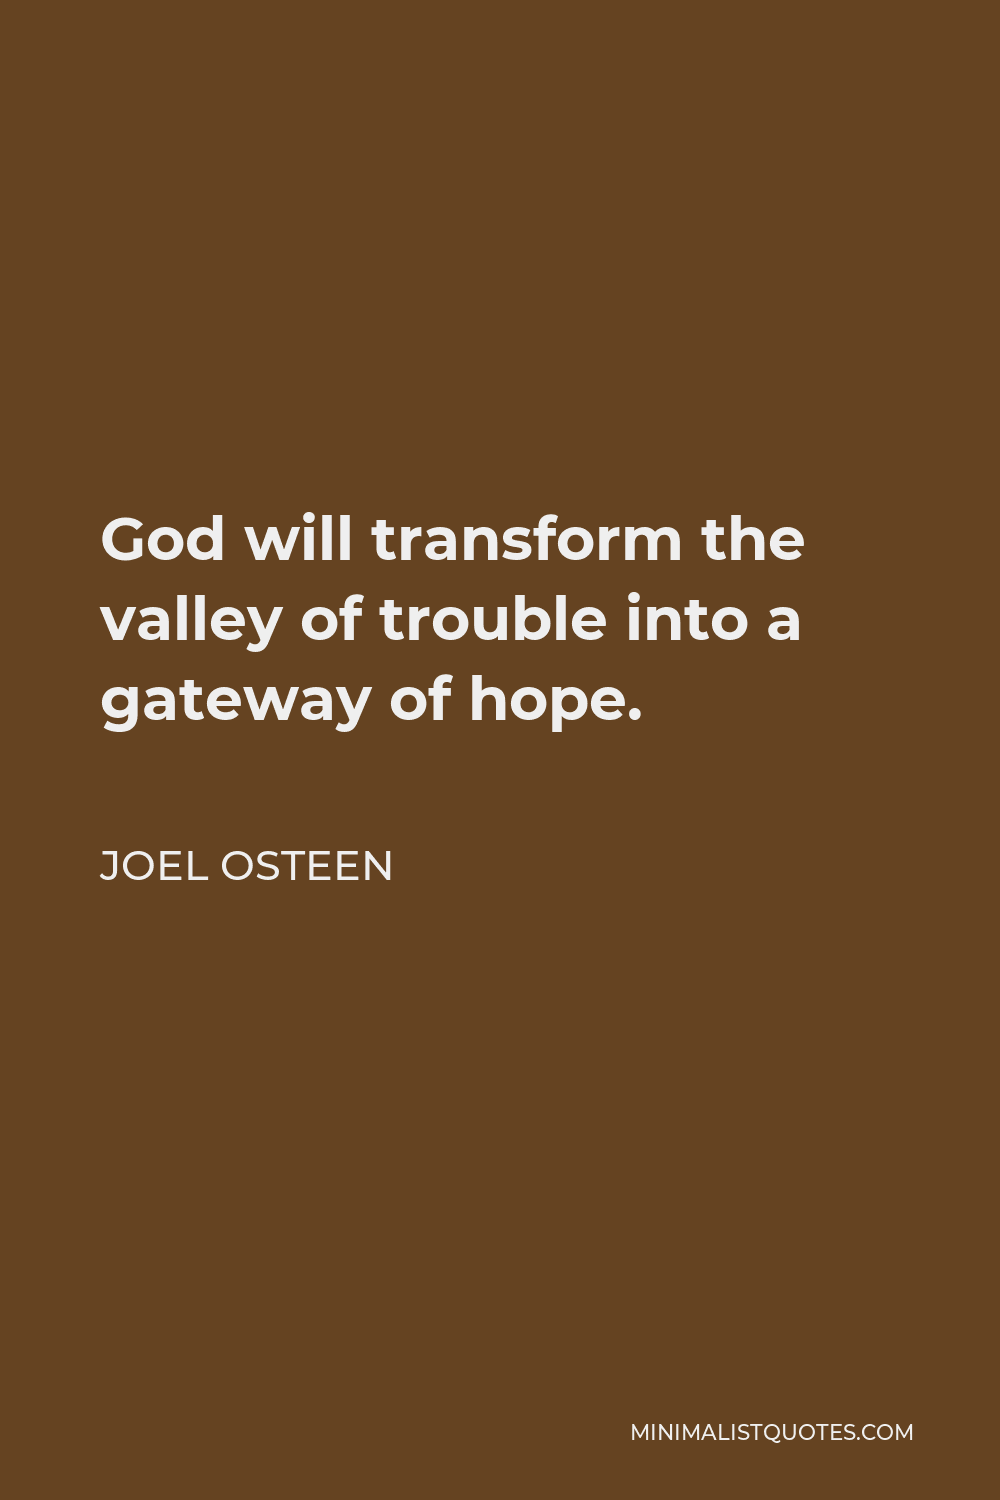 Joel Osteen Quote - God will transform the valley of trouble into a gateway of hope.